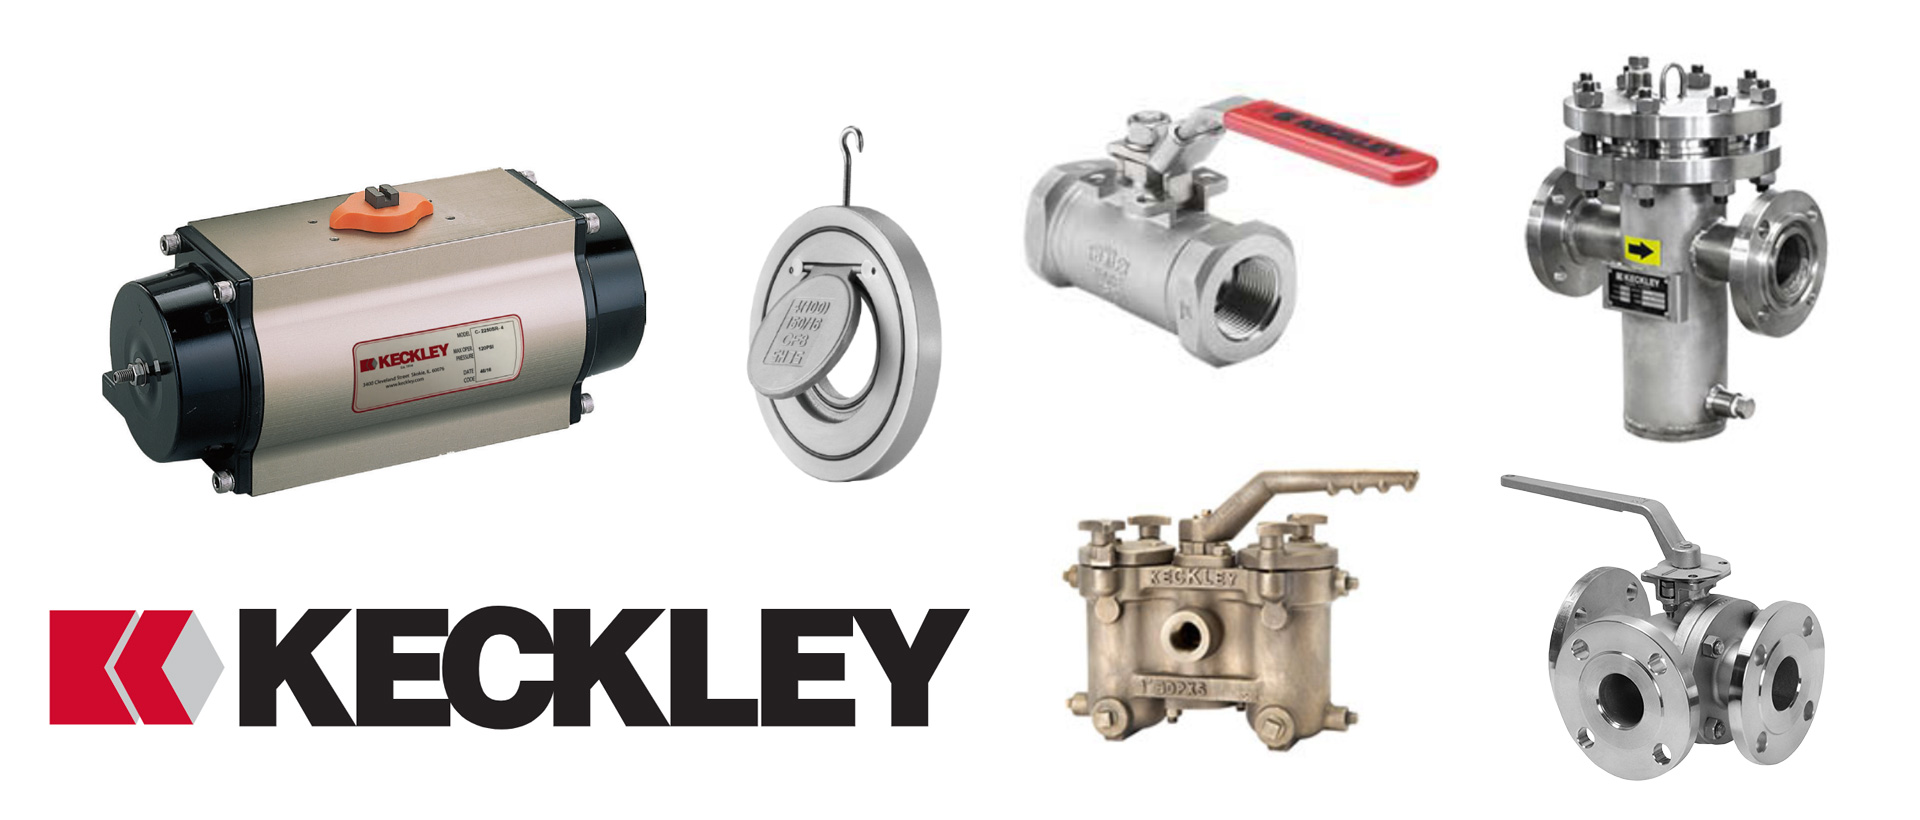 Keckley-Products